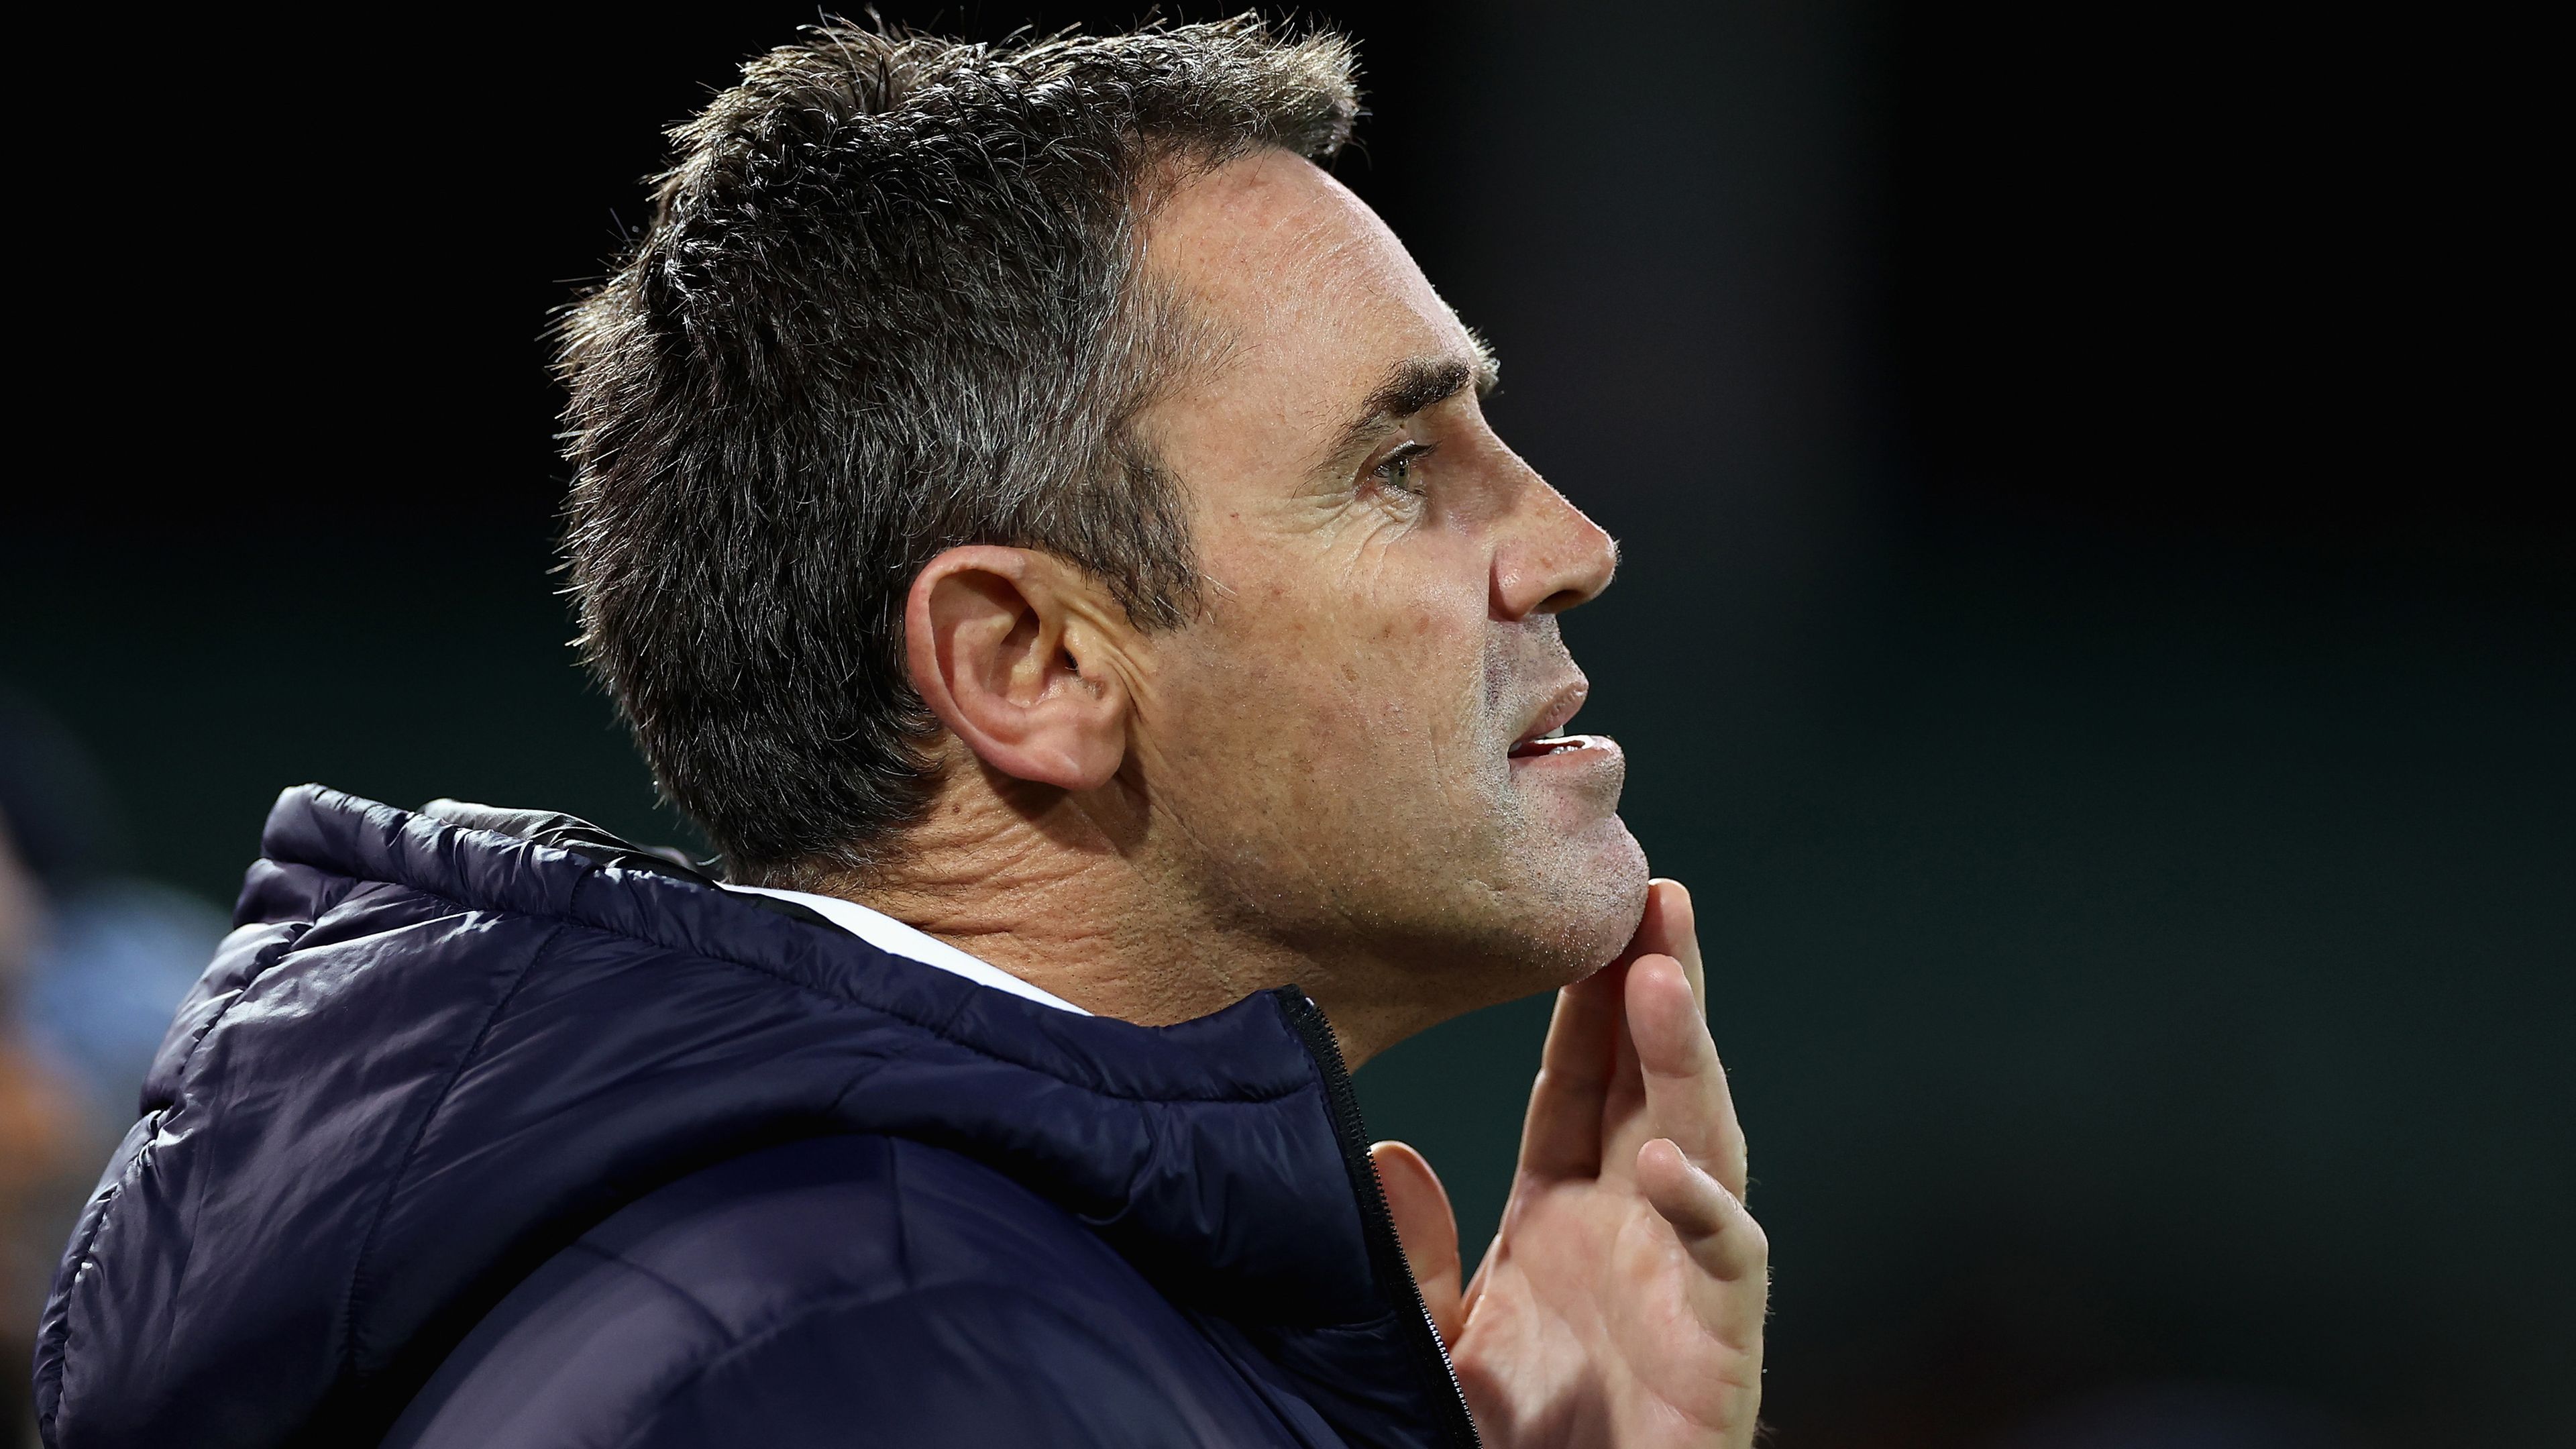 NSW coach Brad Fittler flags changes to Blues squad after 'disappointing' Origin opener